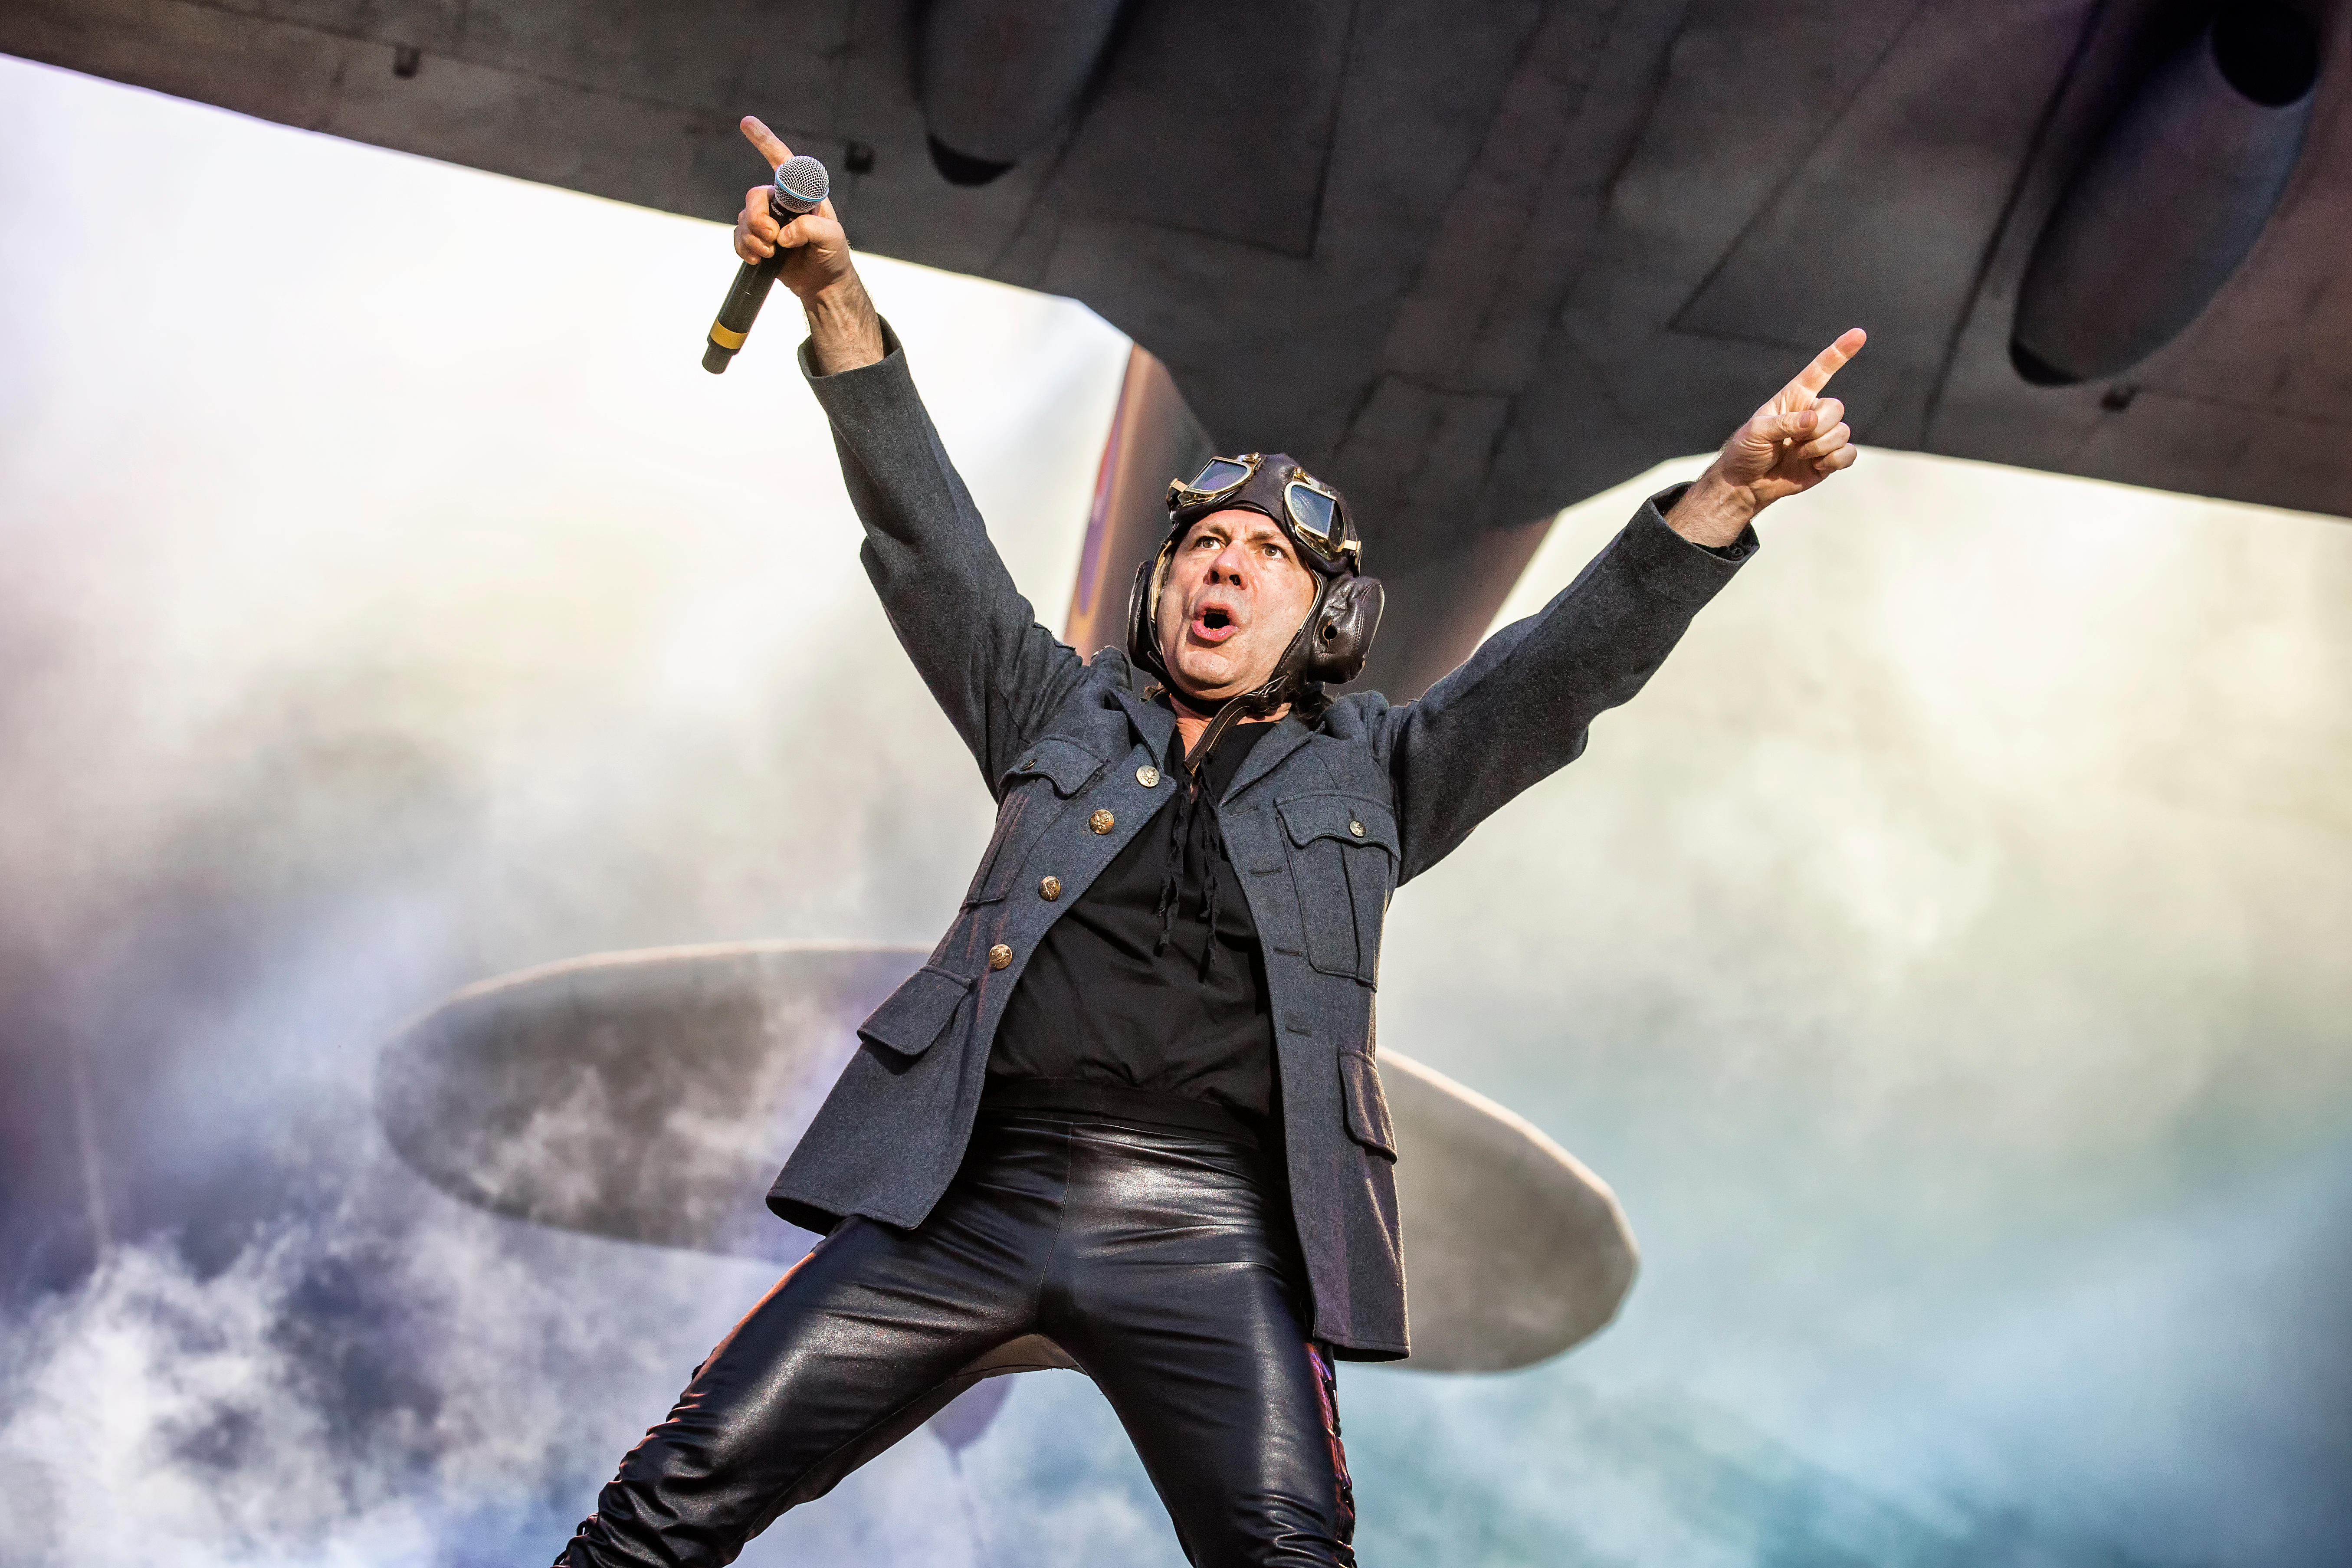 Dickinson performing with Iron Maiden during a Swedish music festival in 2018